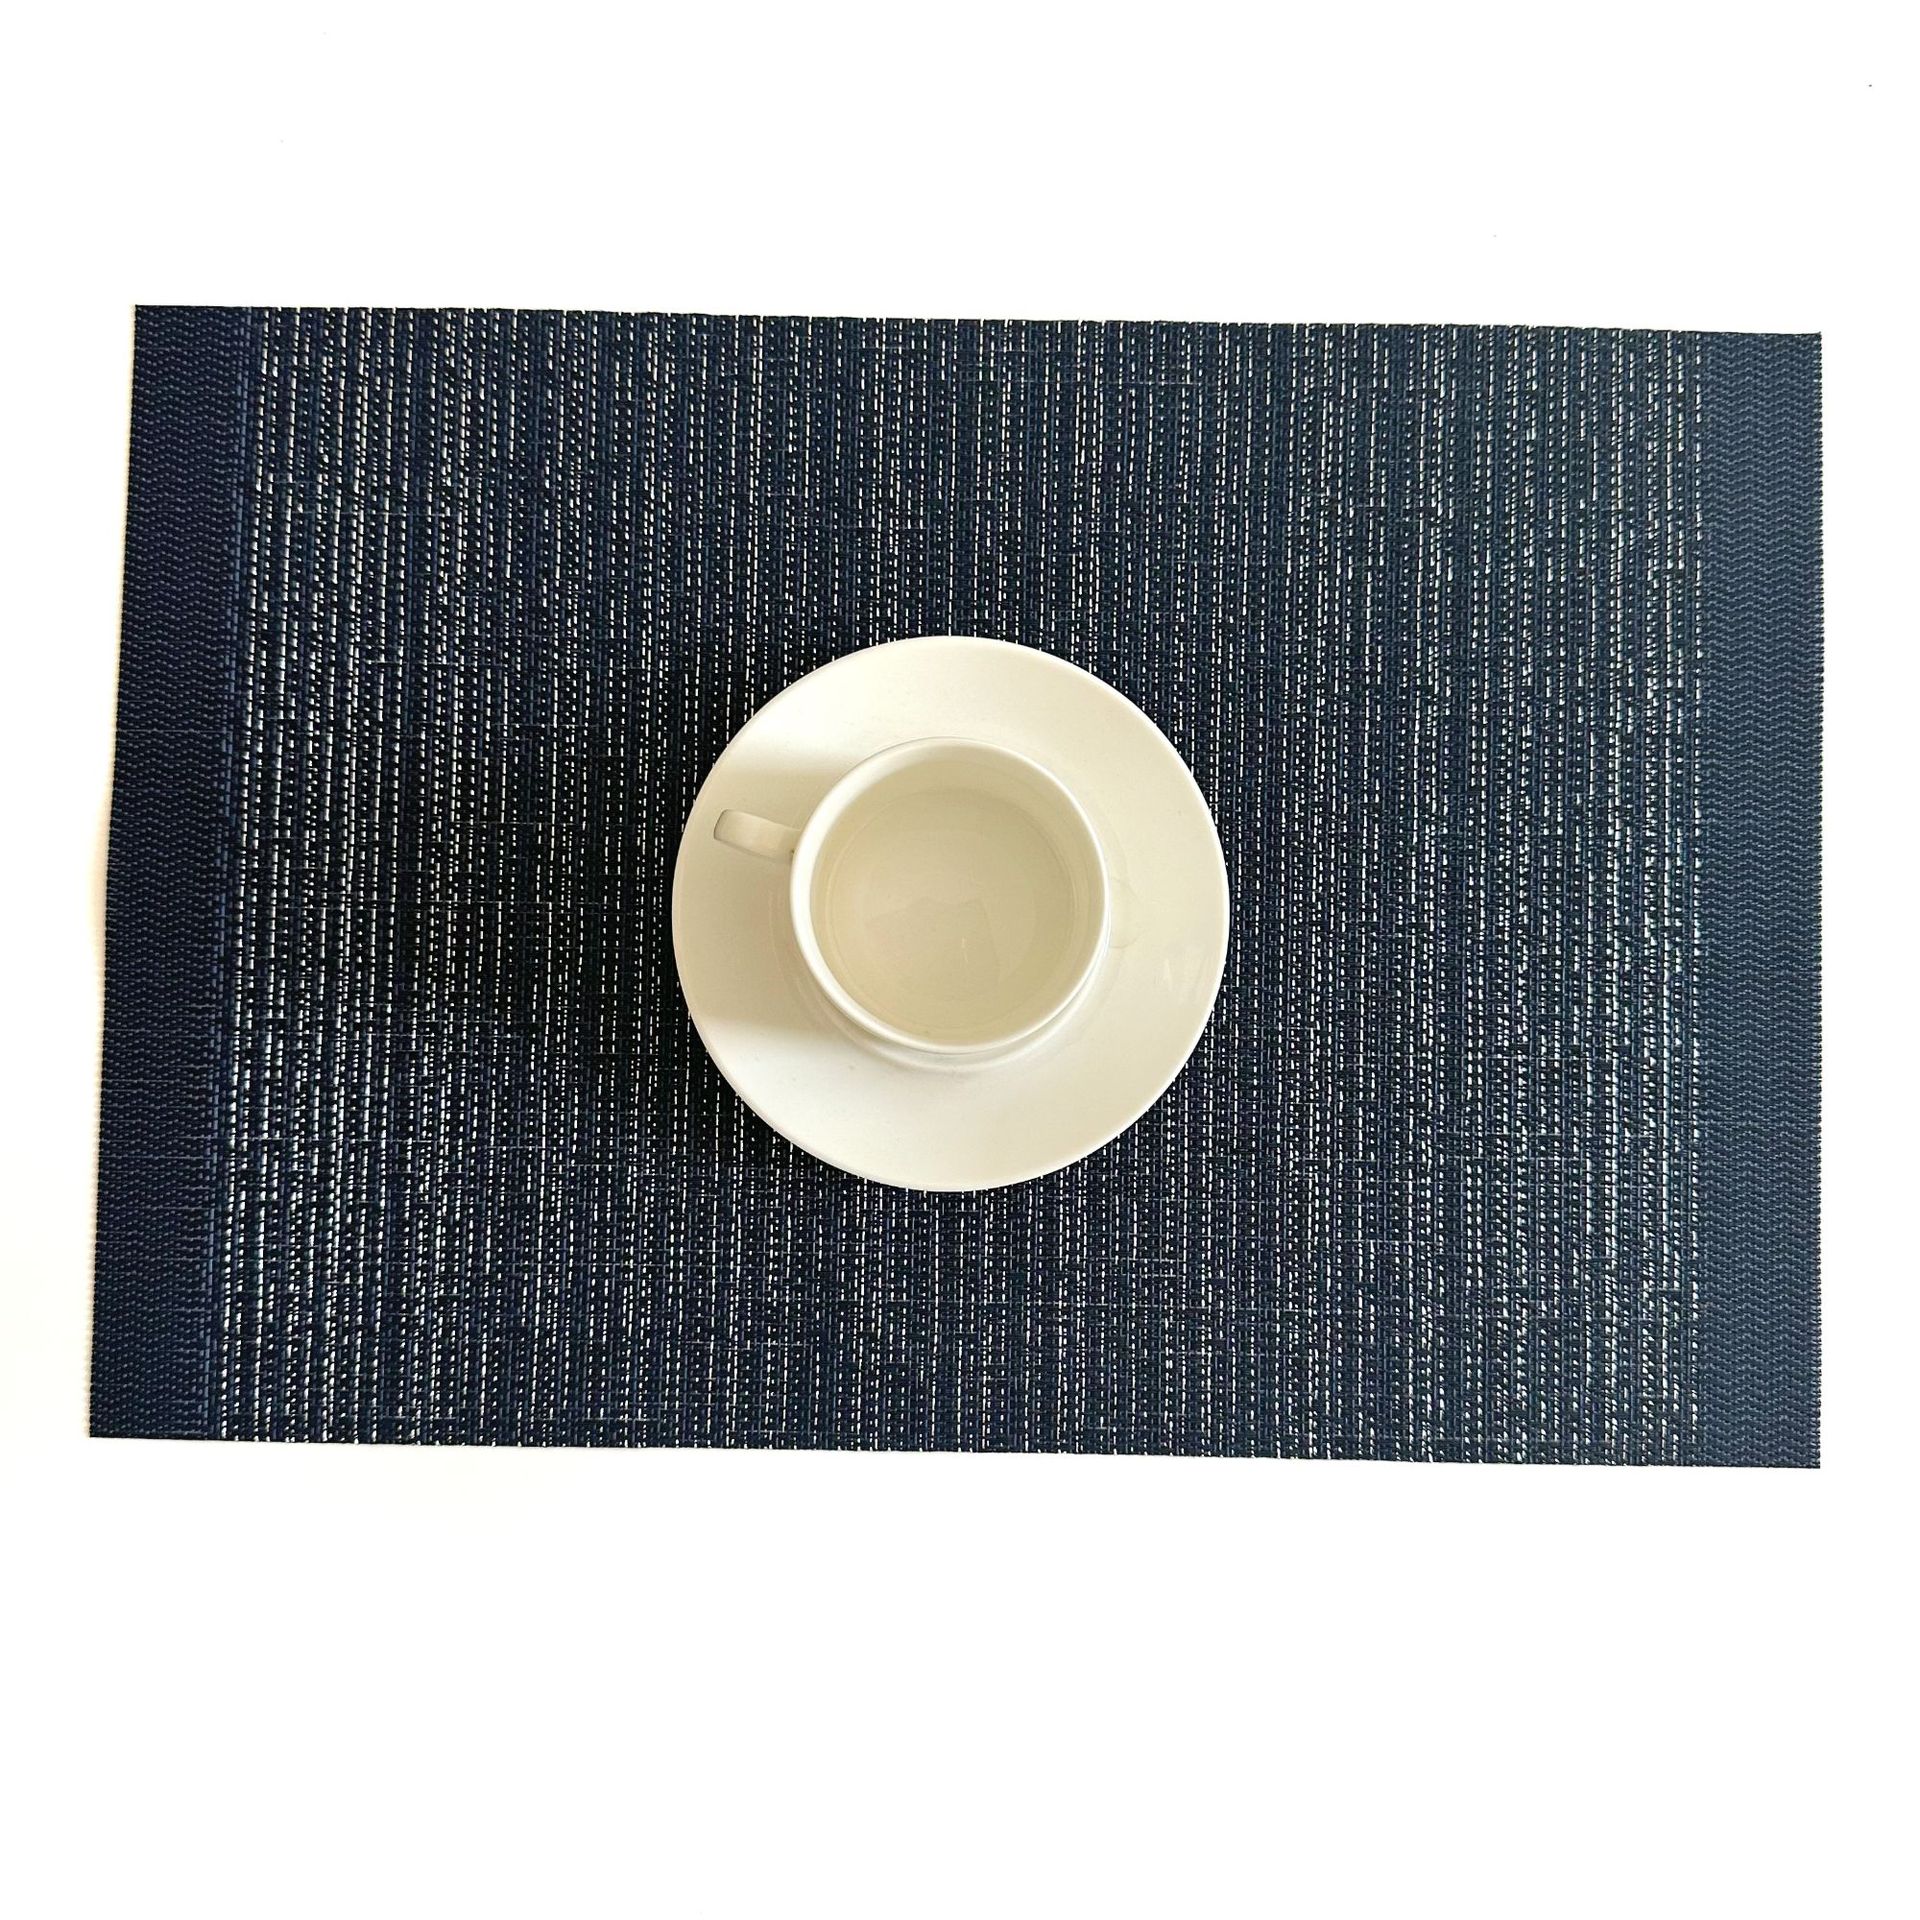 new gold silk pvc placemat hot selling foreign trade western-style placemat woven heat proof mat household hotel dining table cushion coaster mat